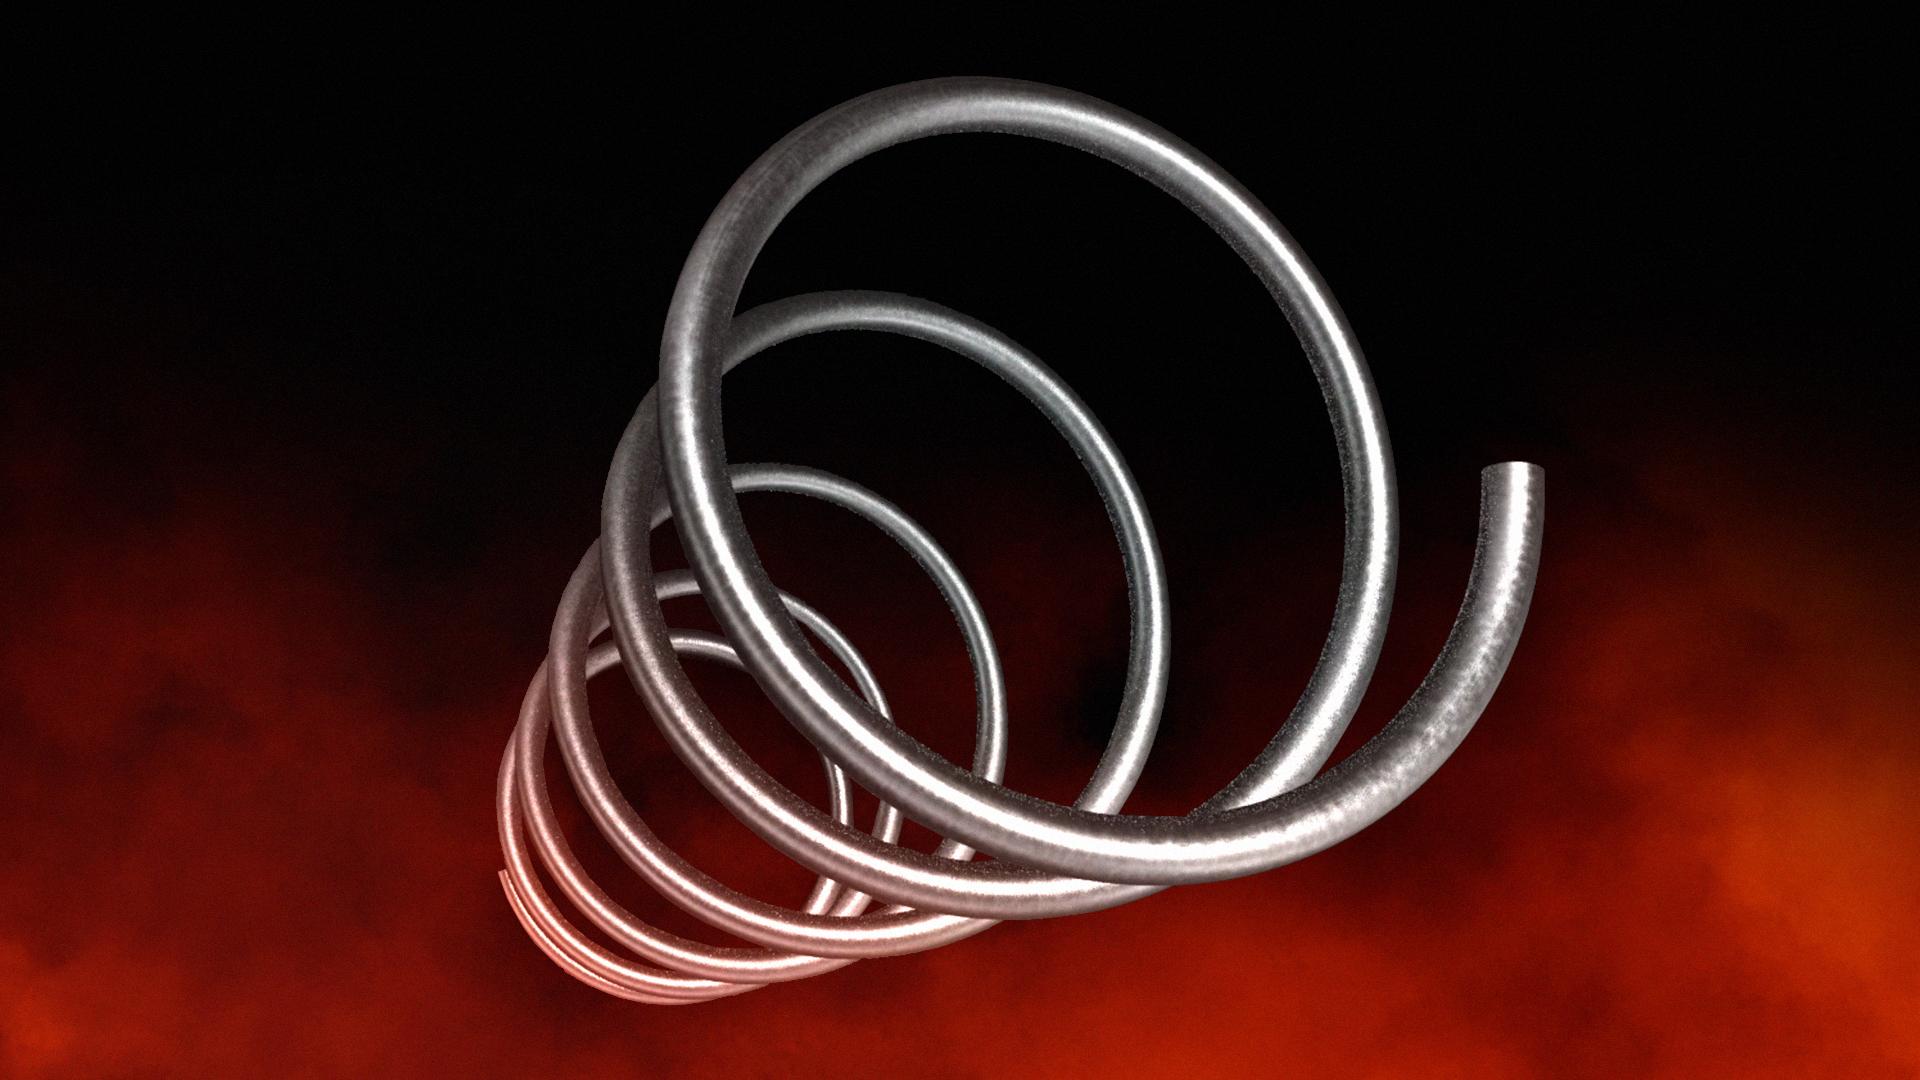 Indestruct Springs Twice-Tempered Steel against a warm, firey background.